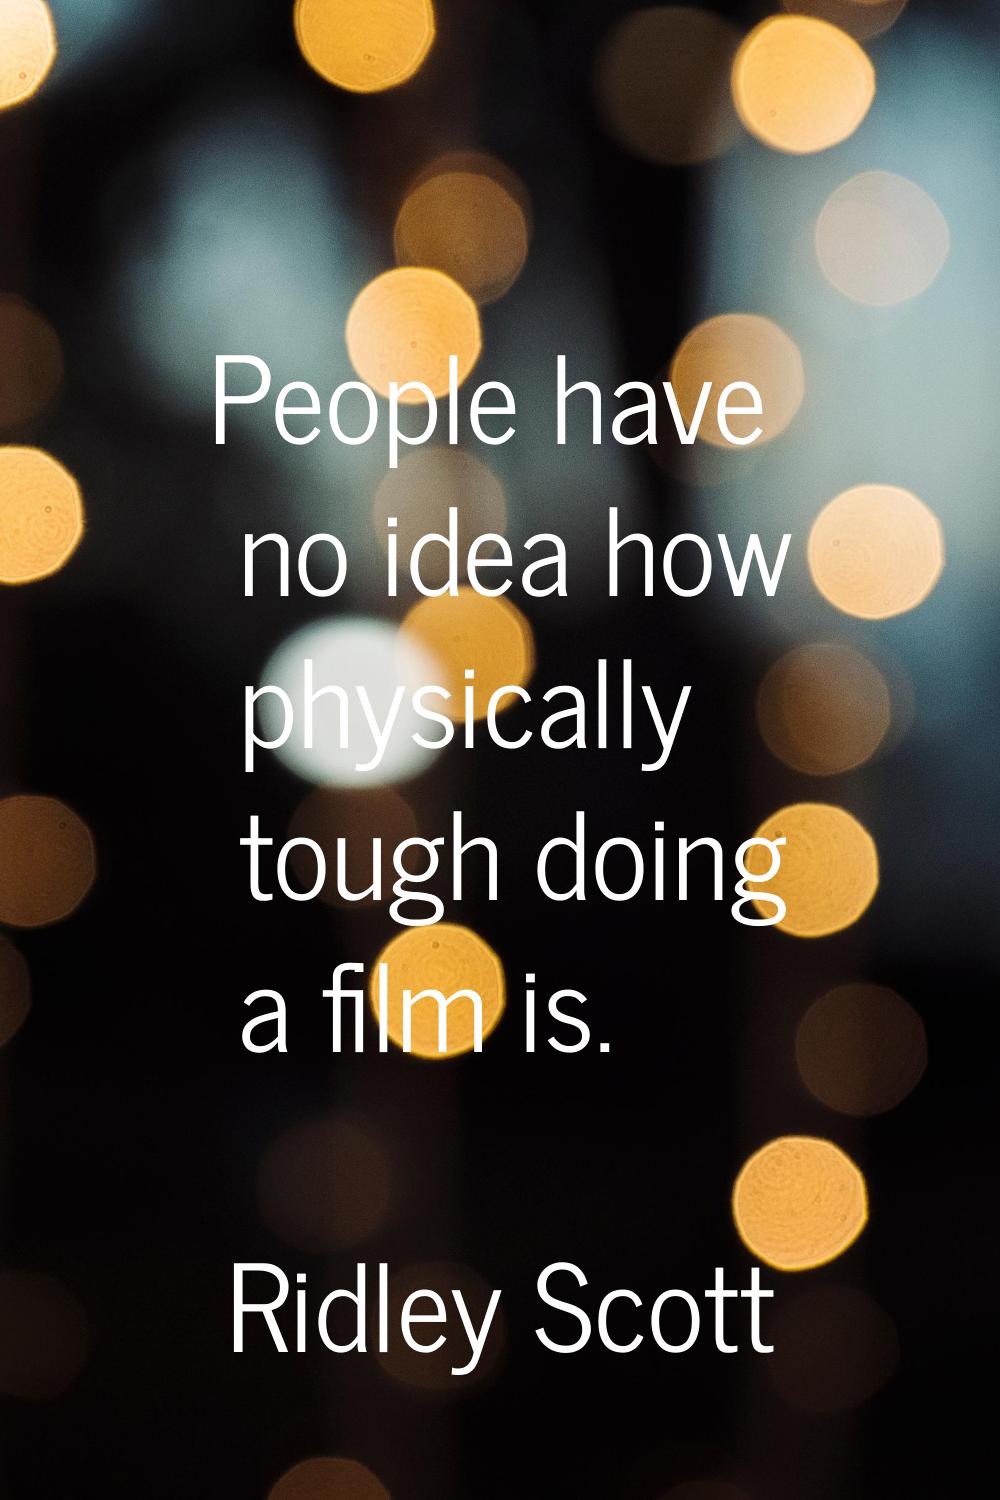 People have no idea how physically tough doing a film is.